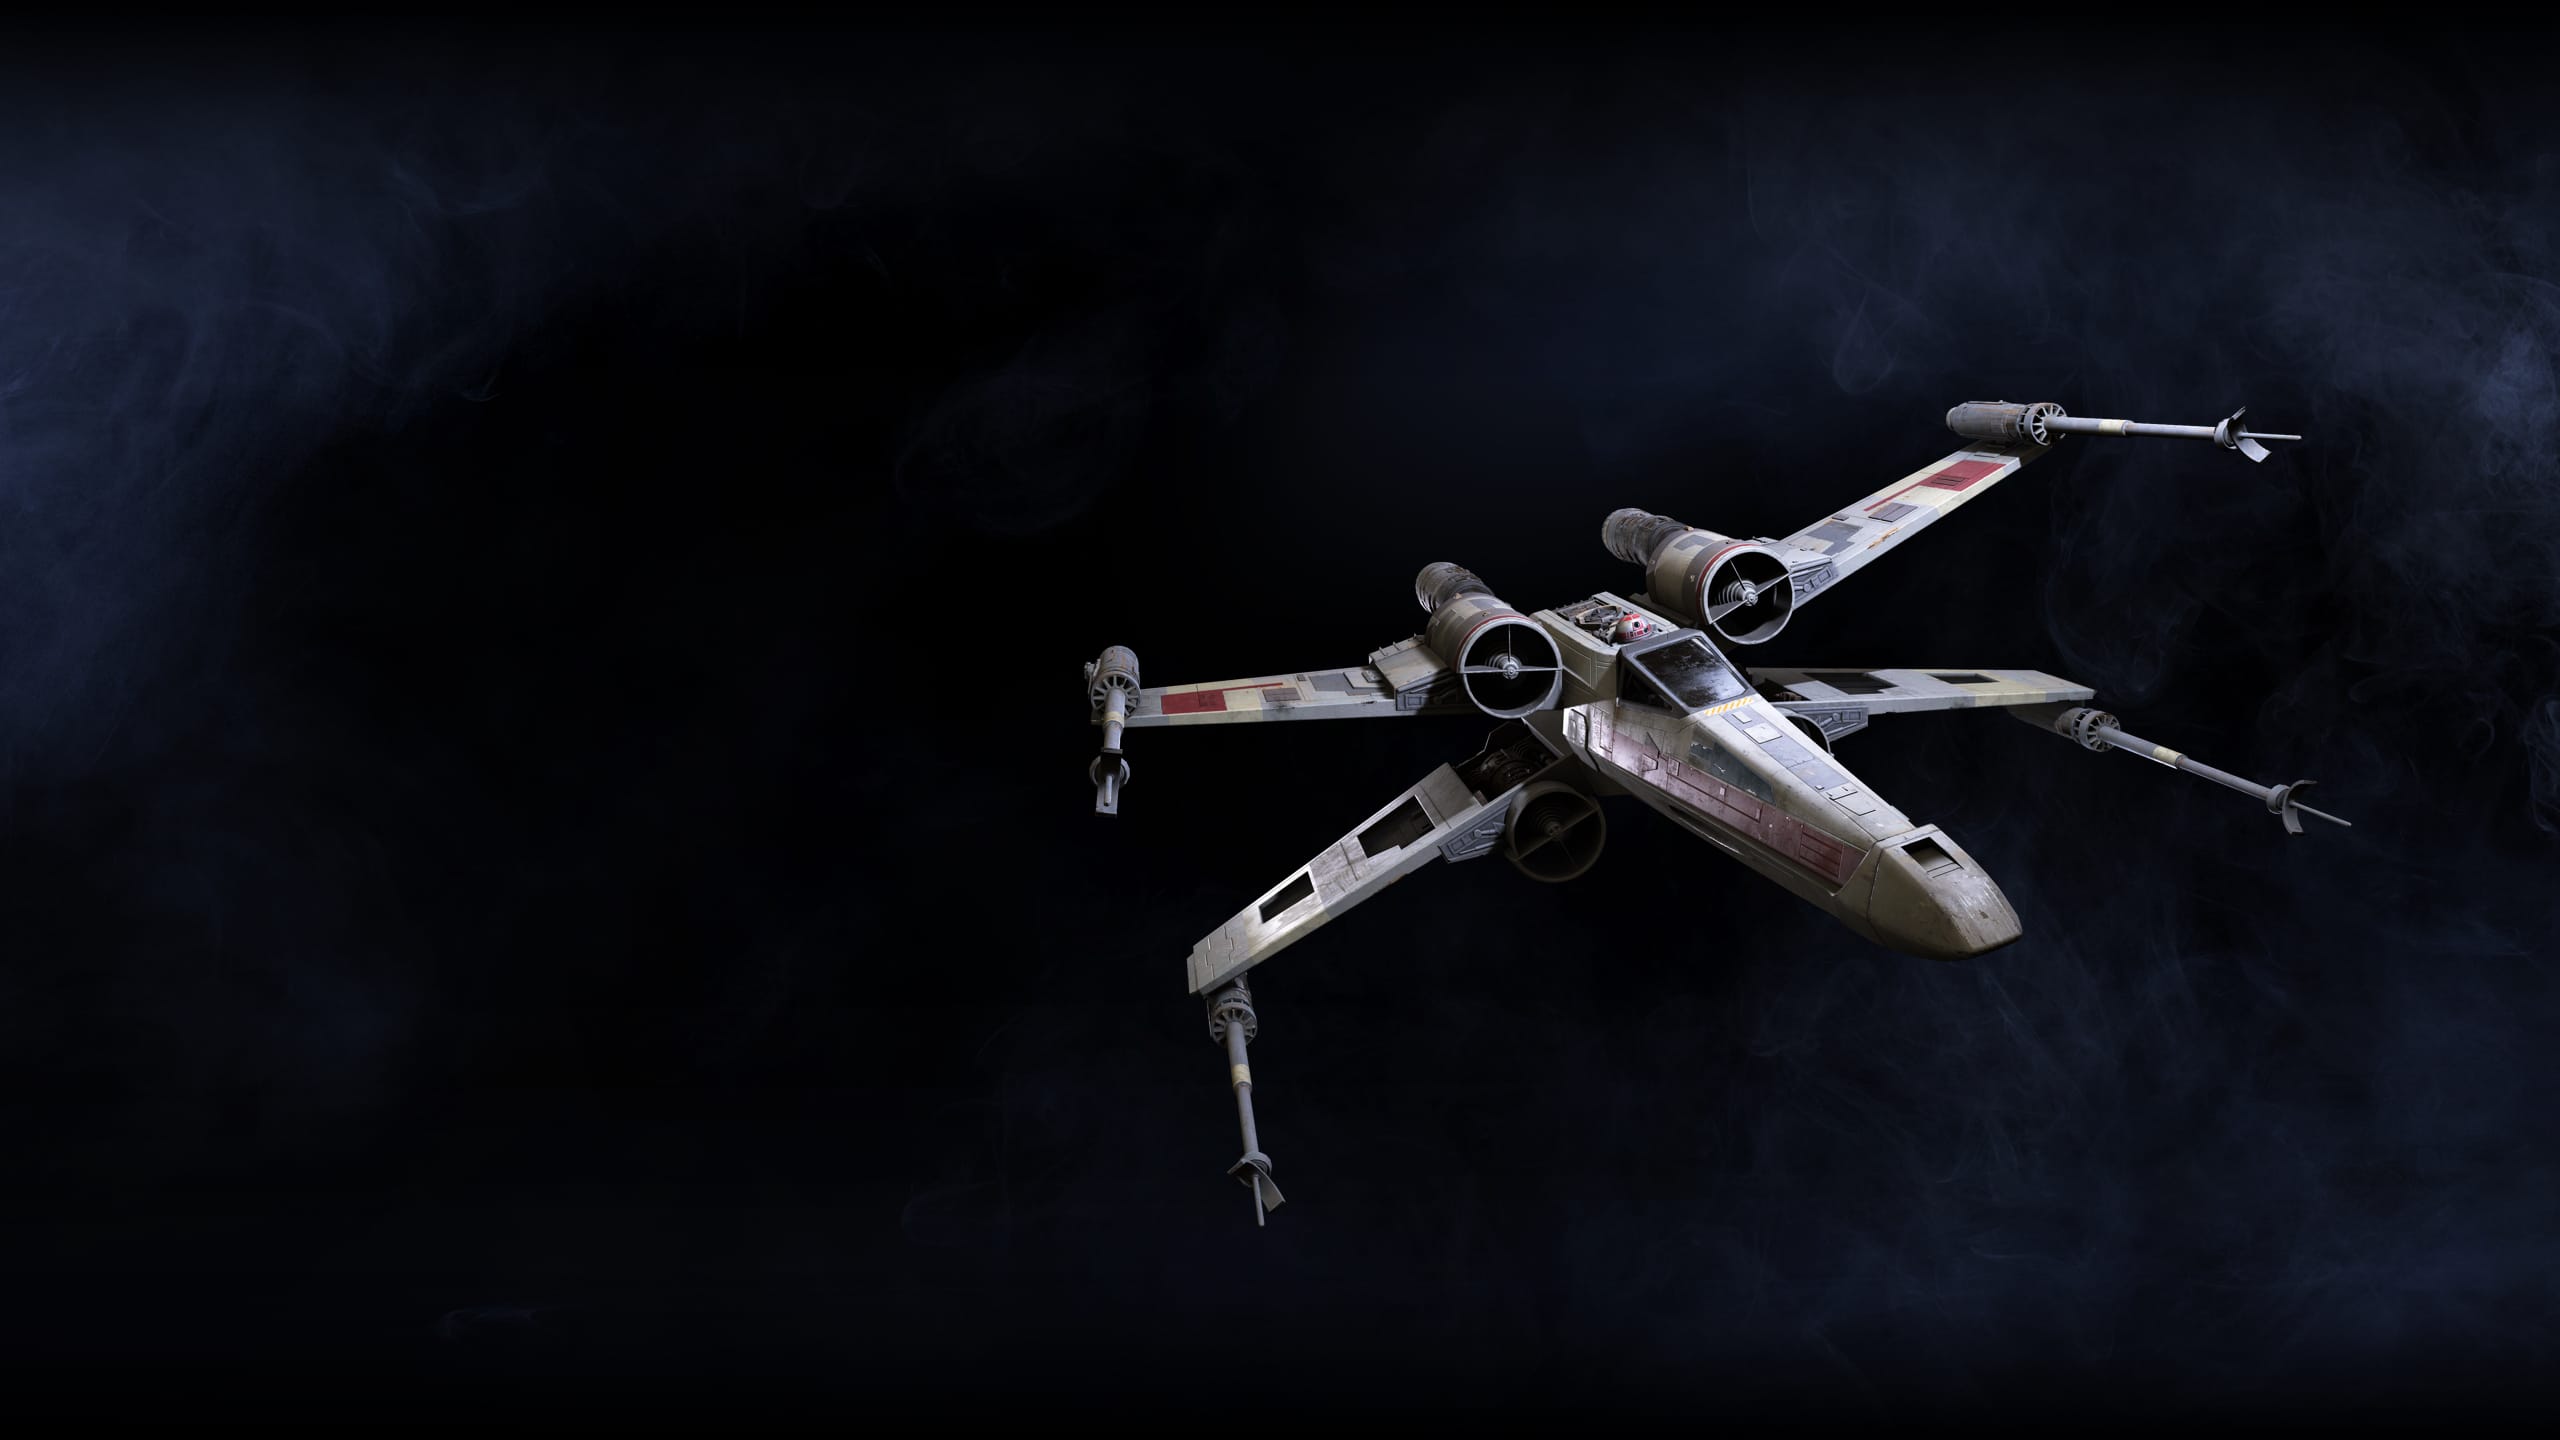 Le chasseur X-Wing